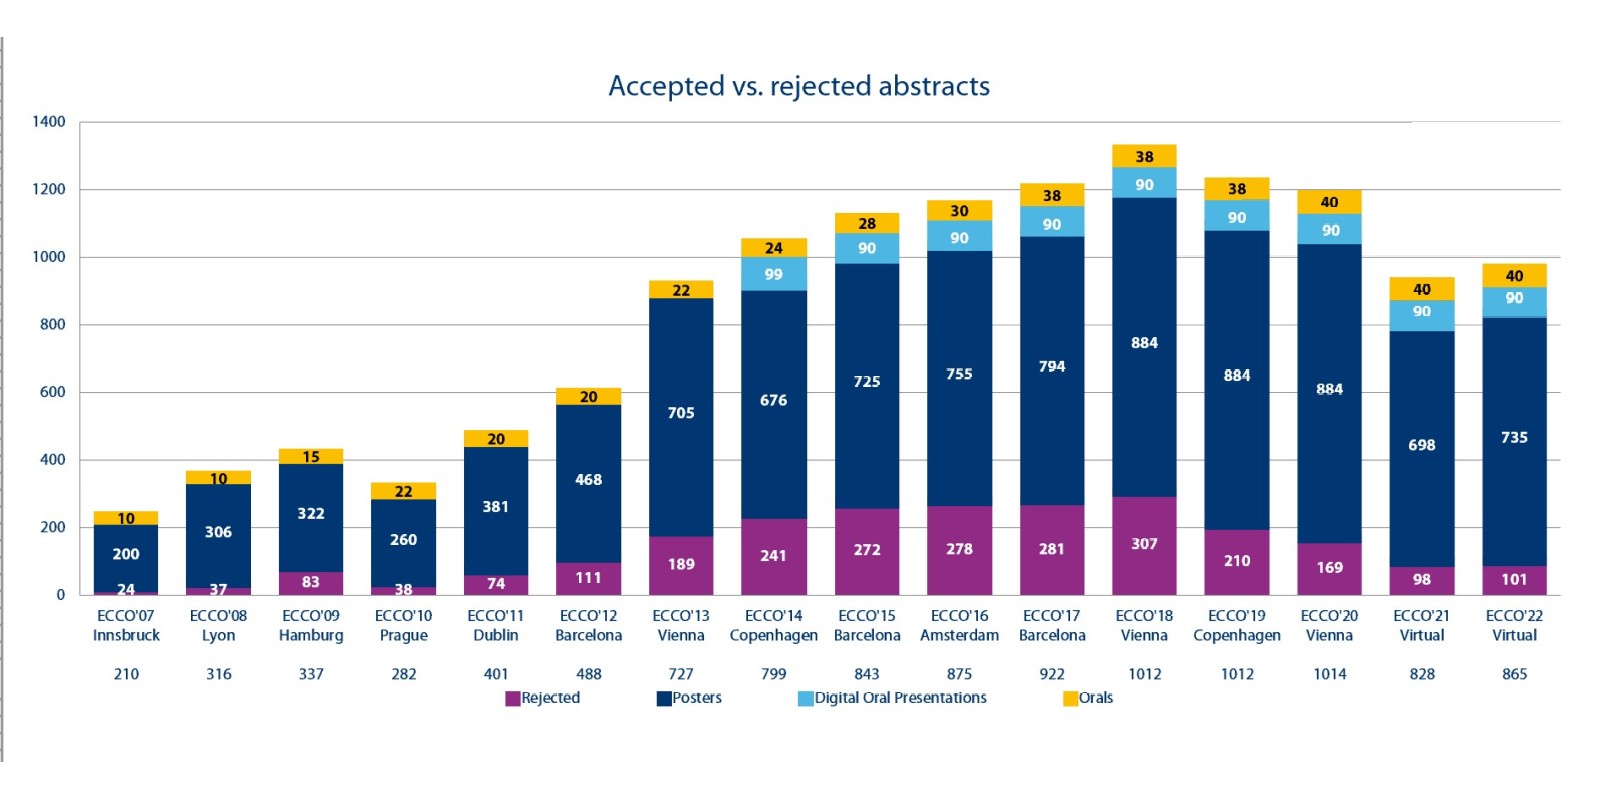 2022 Abstracts accepted vs rejected